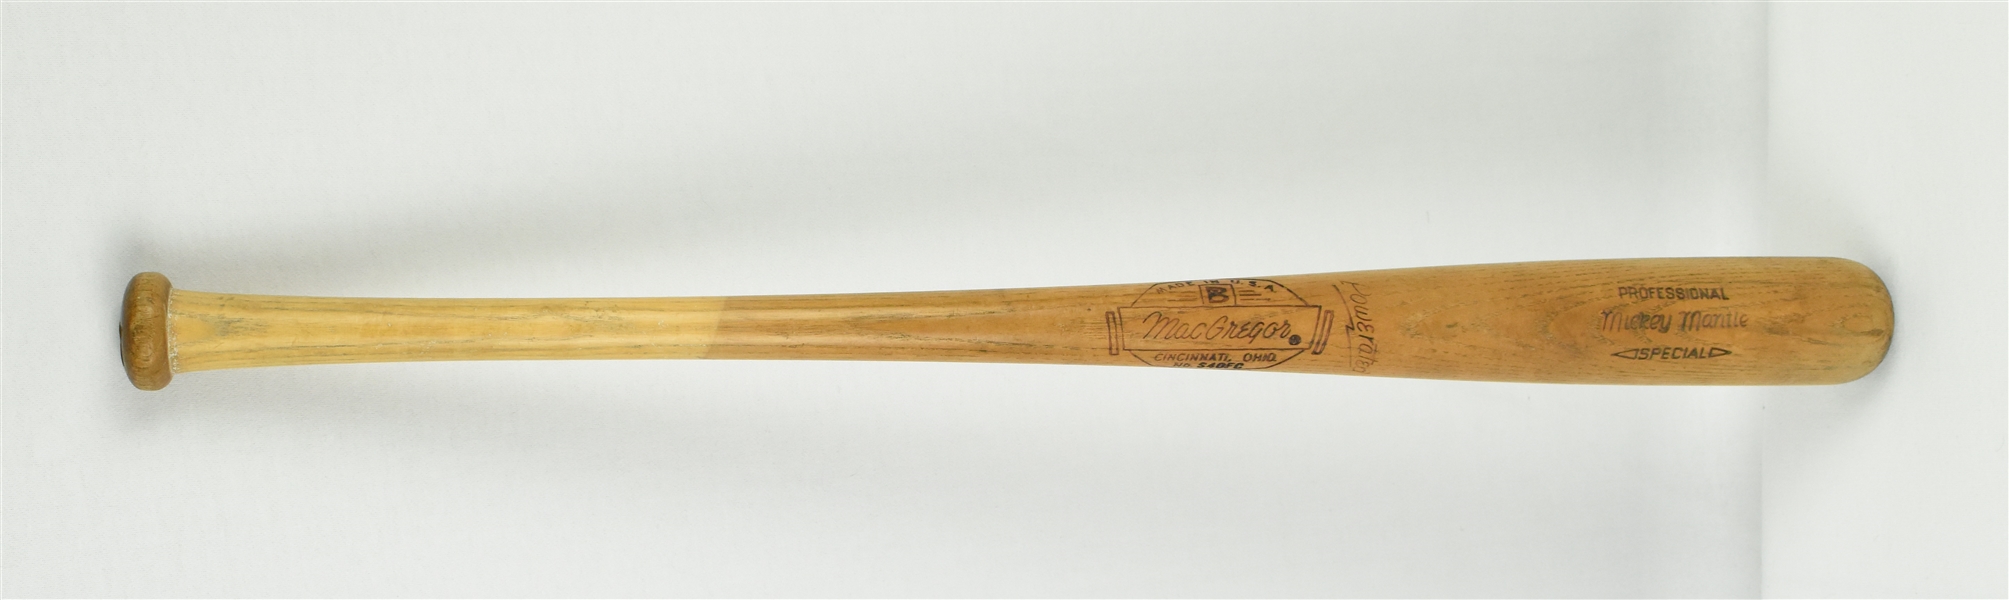 Mickey Mantle 1965-66 Professional Special Bat